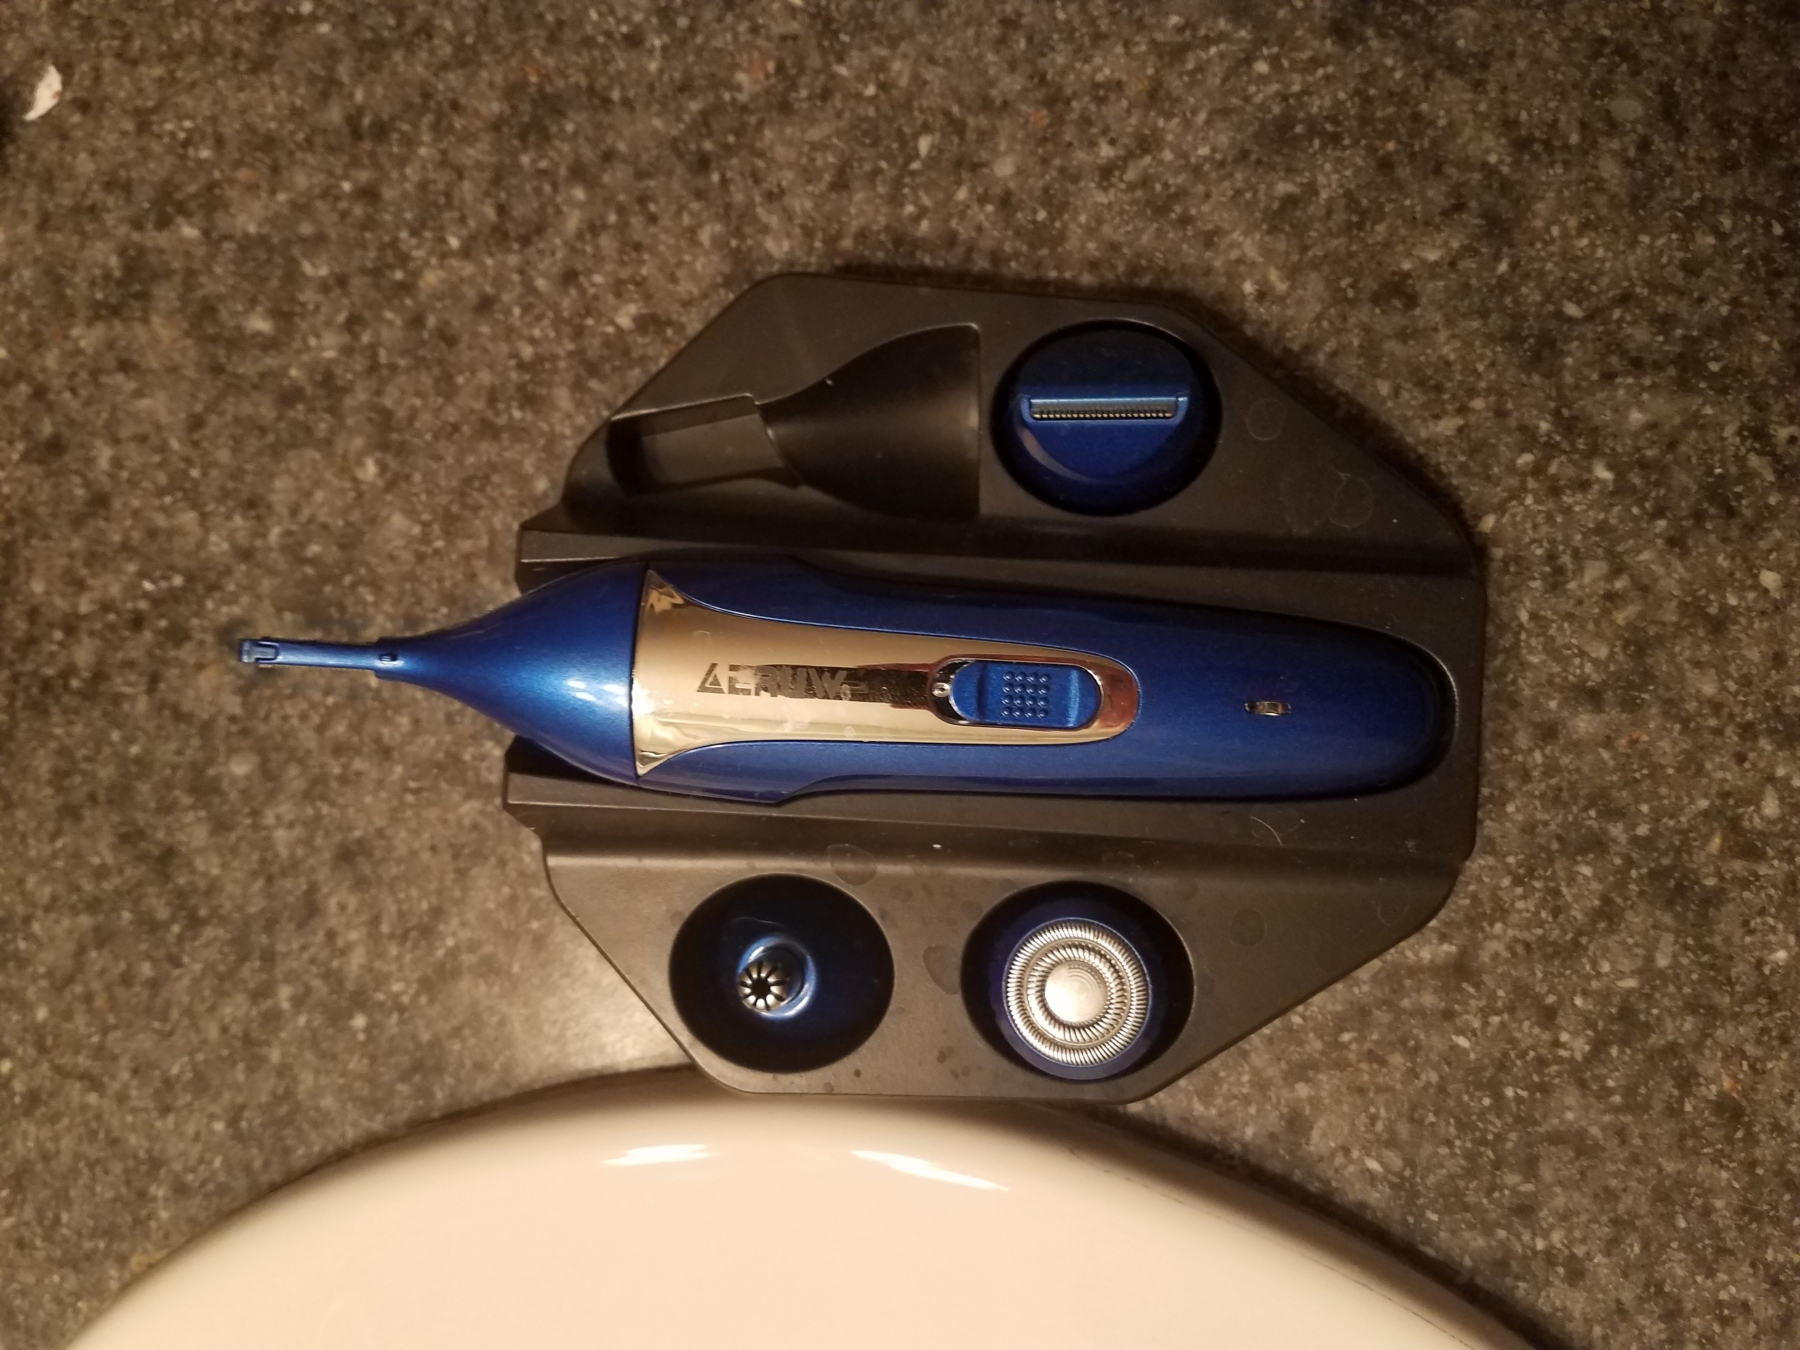 A trimmer with great accessories.